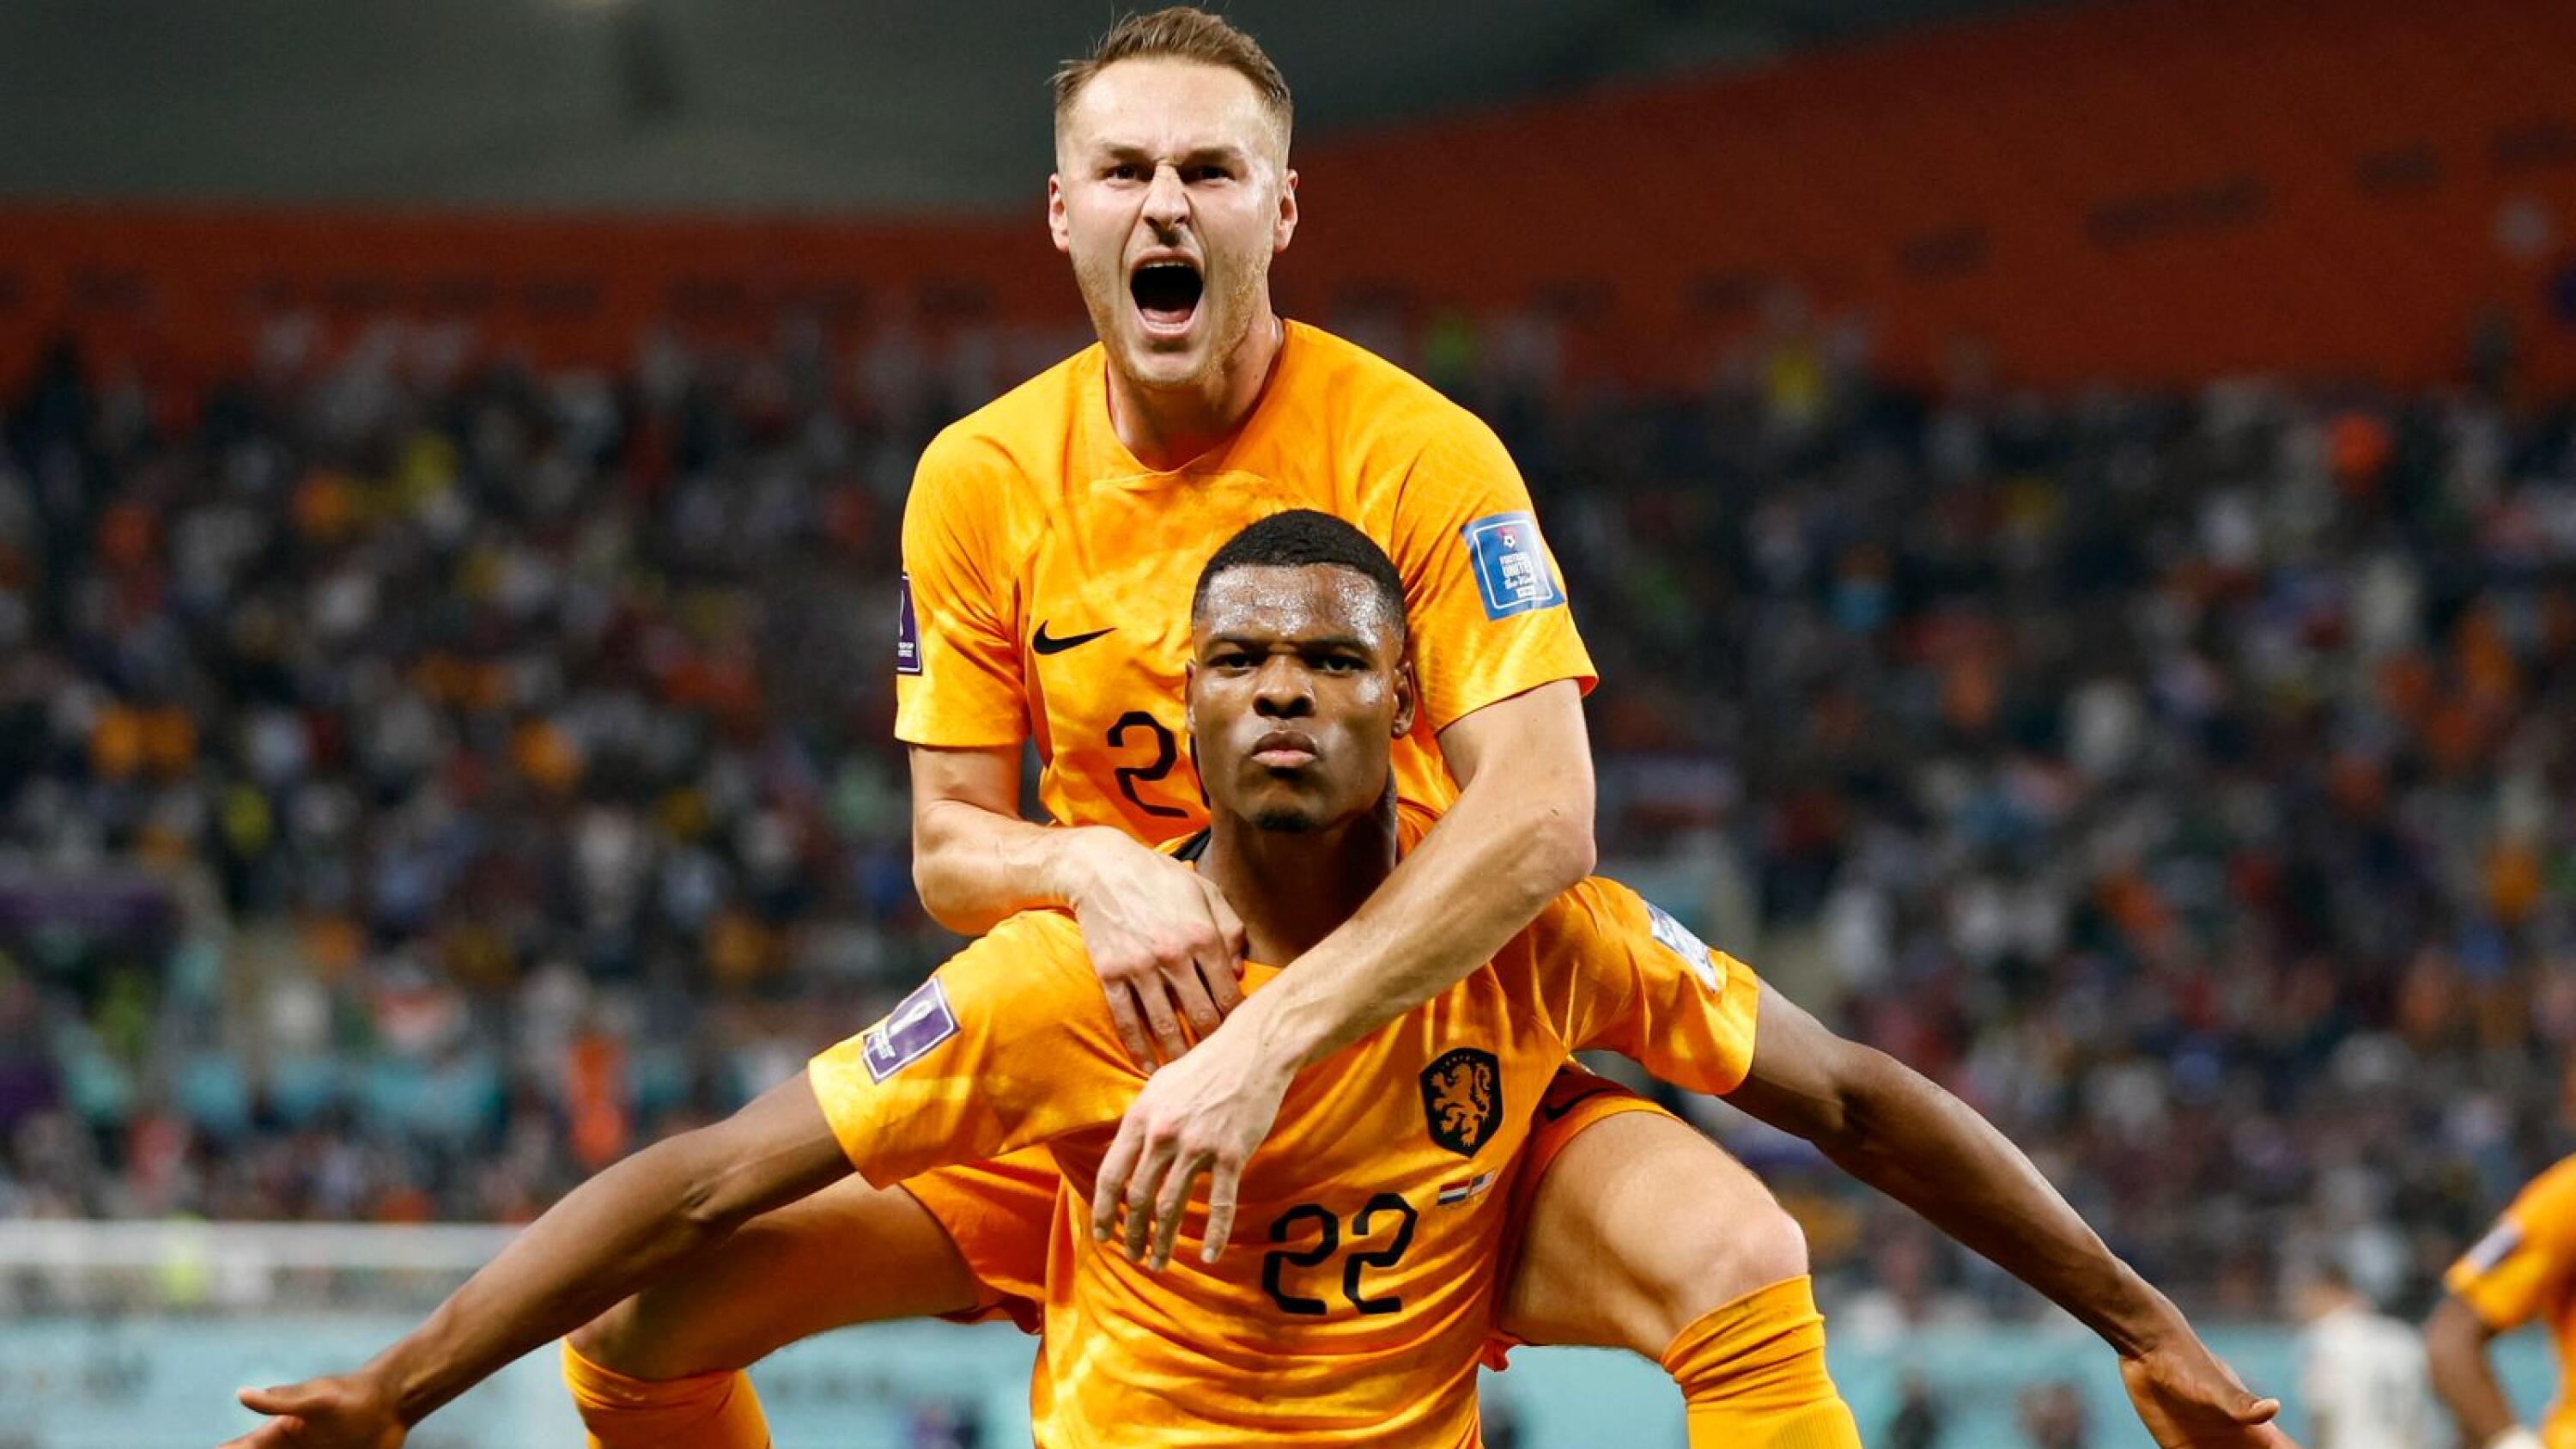 Netherlands' Denzel Dumfries celebrates with Teun Koopmeiners after scoring their third goal during their World Cup Round of 16 clash against the United States at Khalifa International Stadium in Doha on Saturday